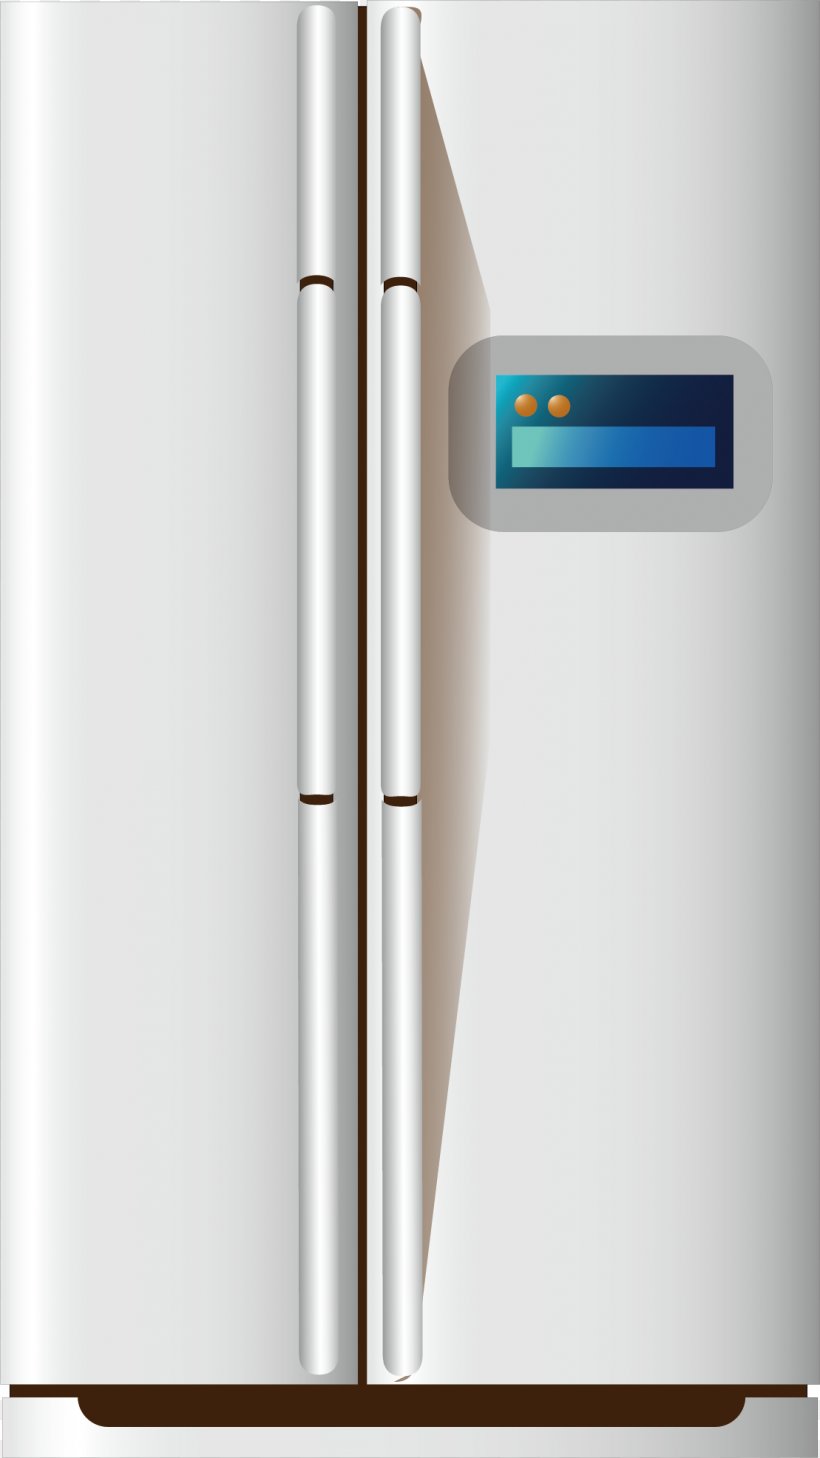 Refrigerator Home Appliance Clip Art, PNG, 1109x1973px, Refrigerator, Cartoon, Coreldraw, Home Appliance, Refrigeration Download Free